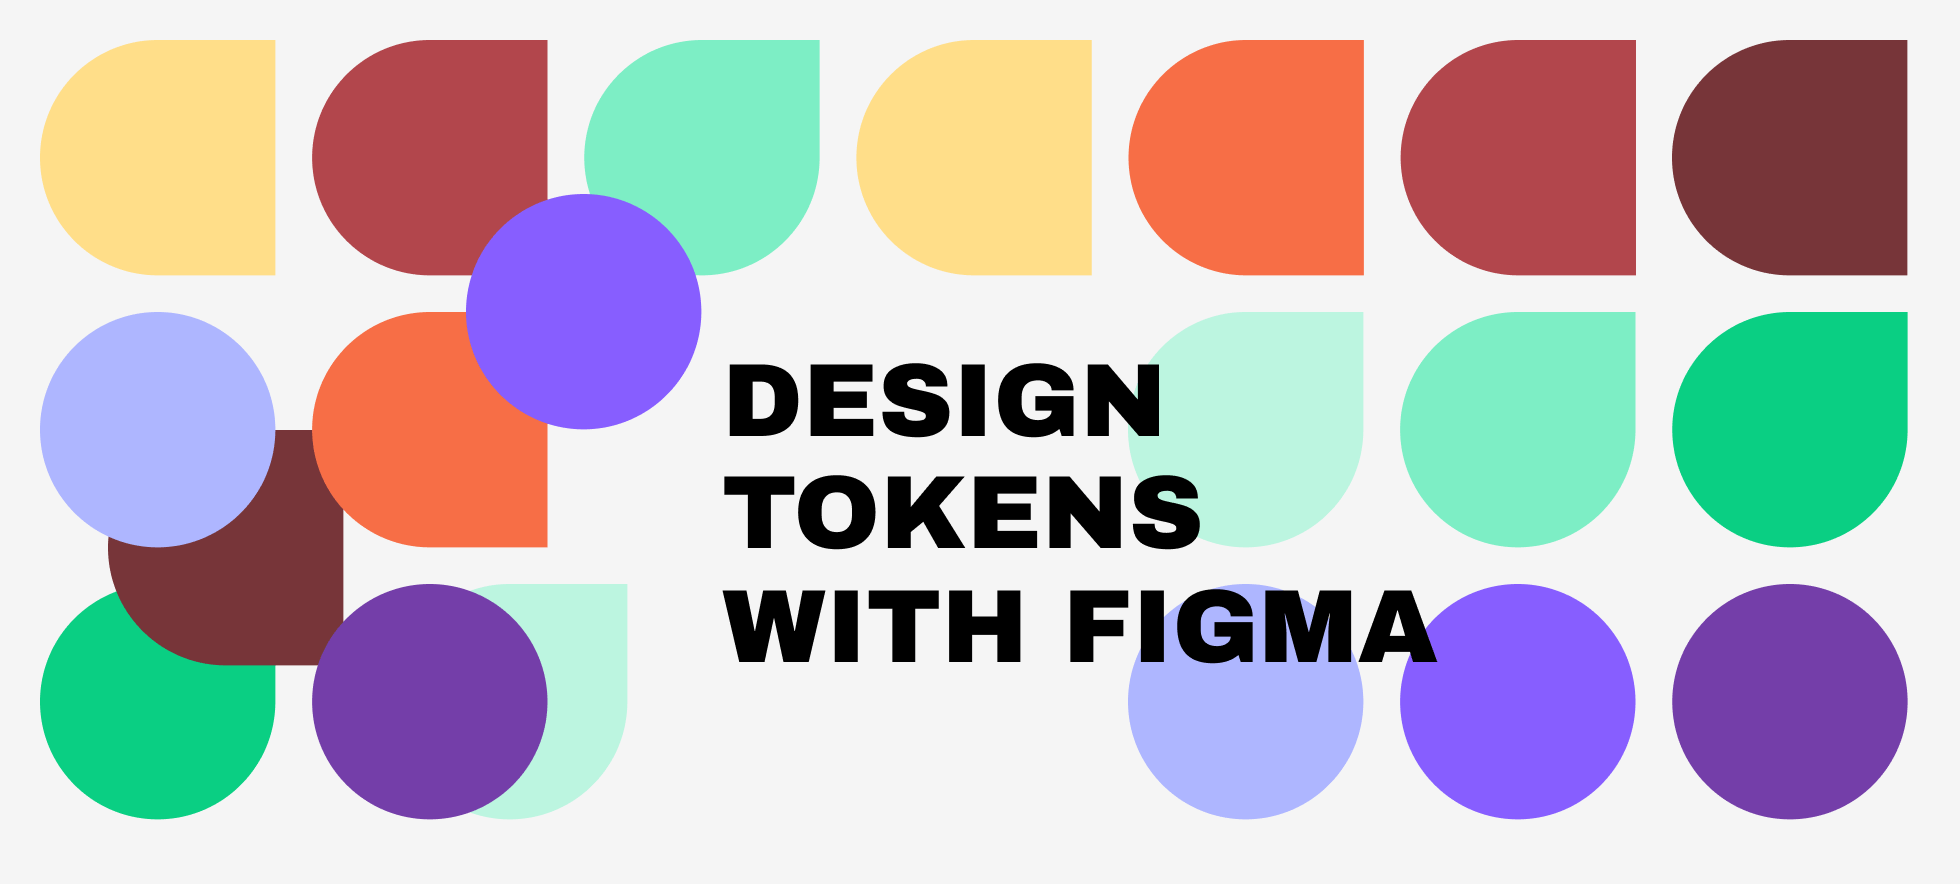 Design Tokens With Figma A Couple Of Days Ago Made A Free Ui Kit By Pavel Laptev Prototypr